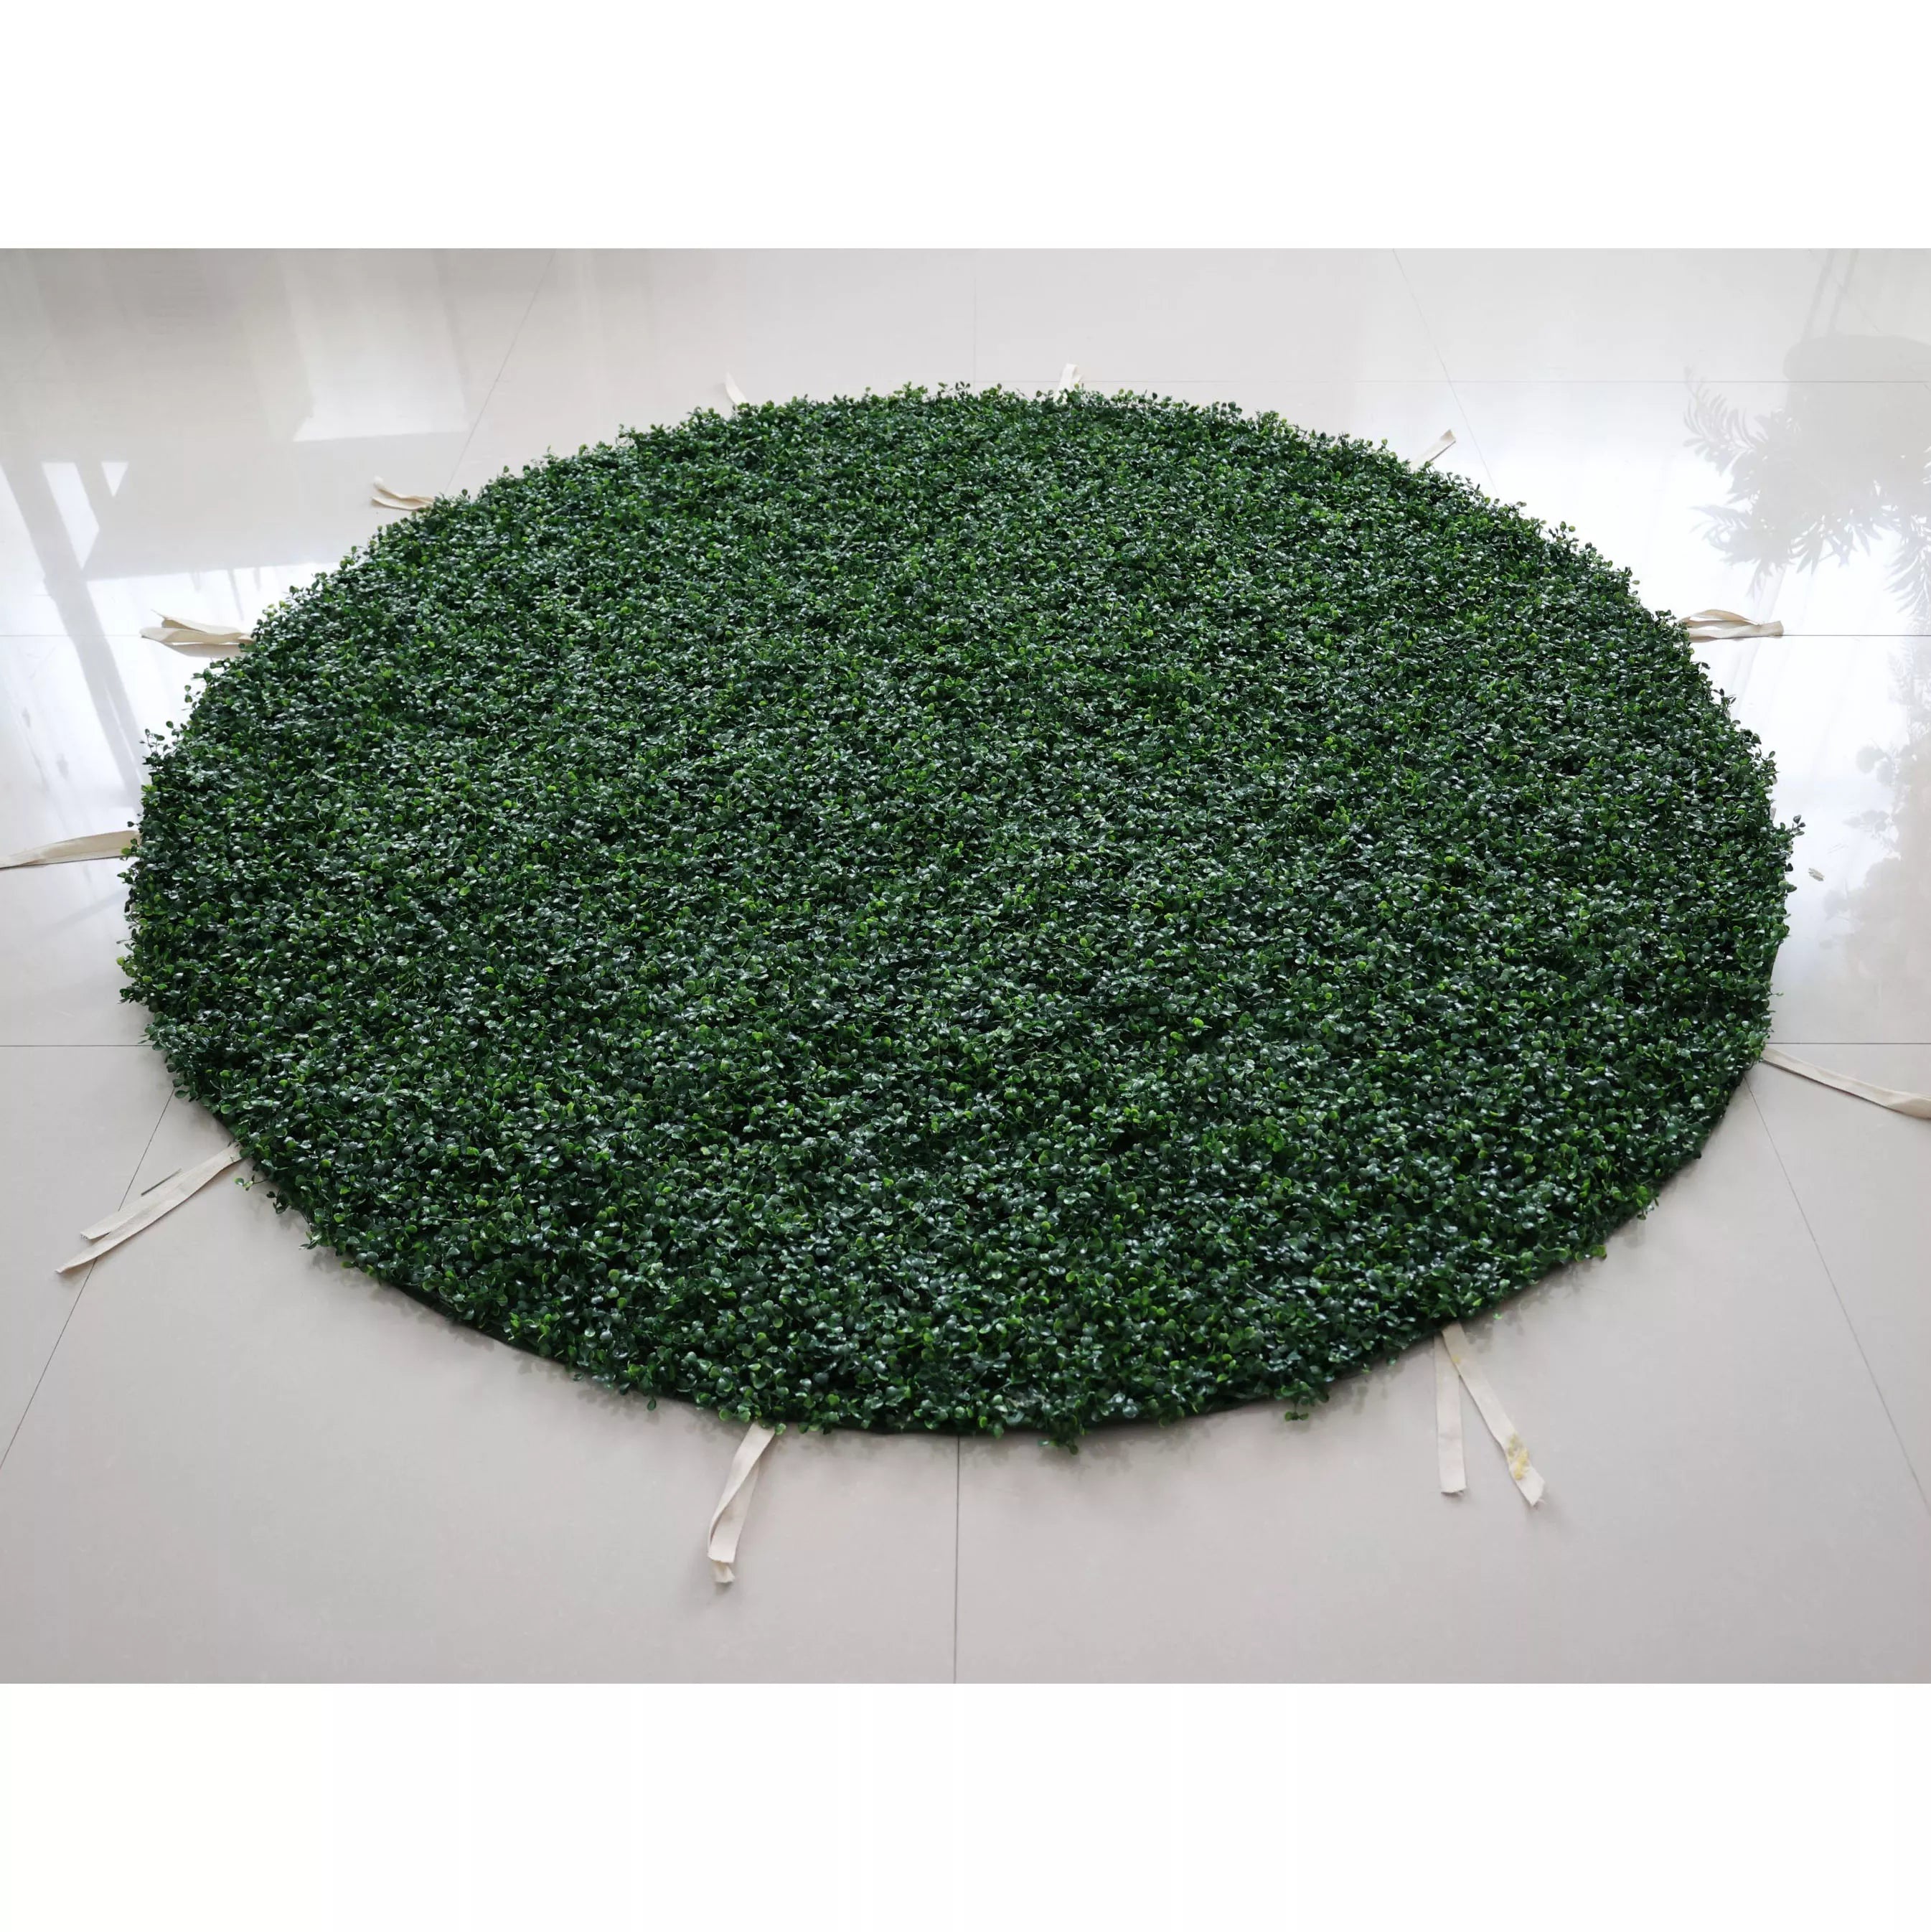 Valar Flowers Roll Up Fabric Artificial Green Grass Wall Wedding Backdrop, Floral Party Decor, Event Photography-VF-086-1-2